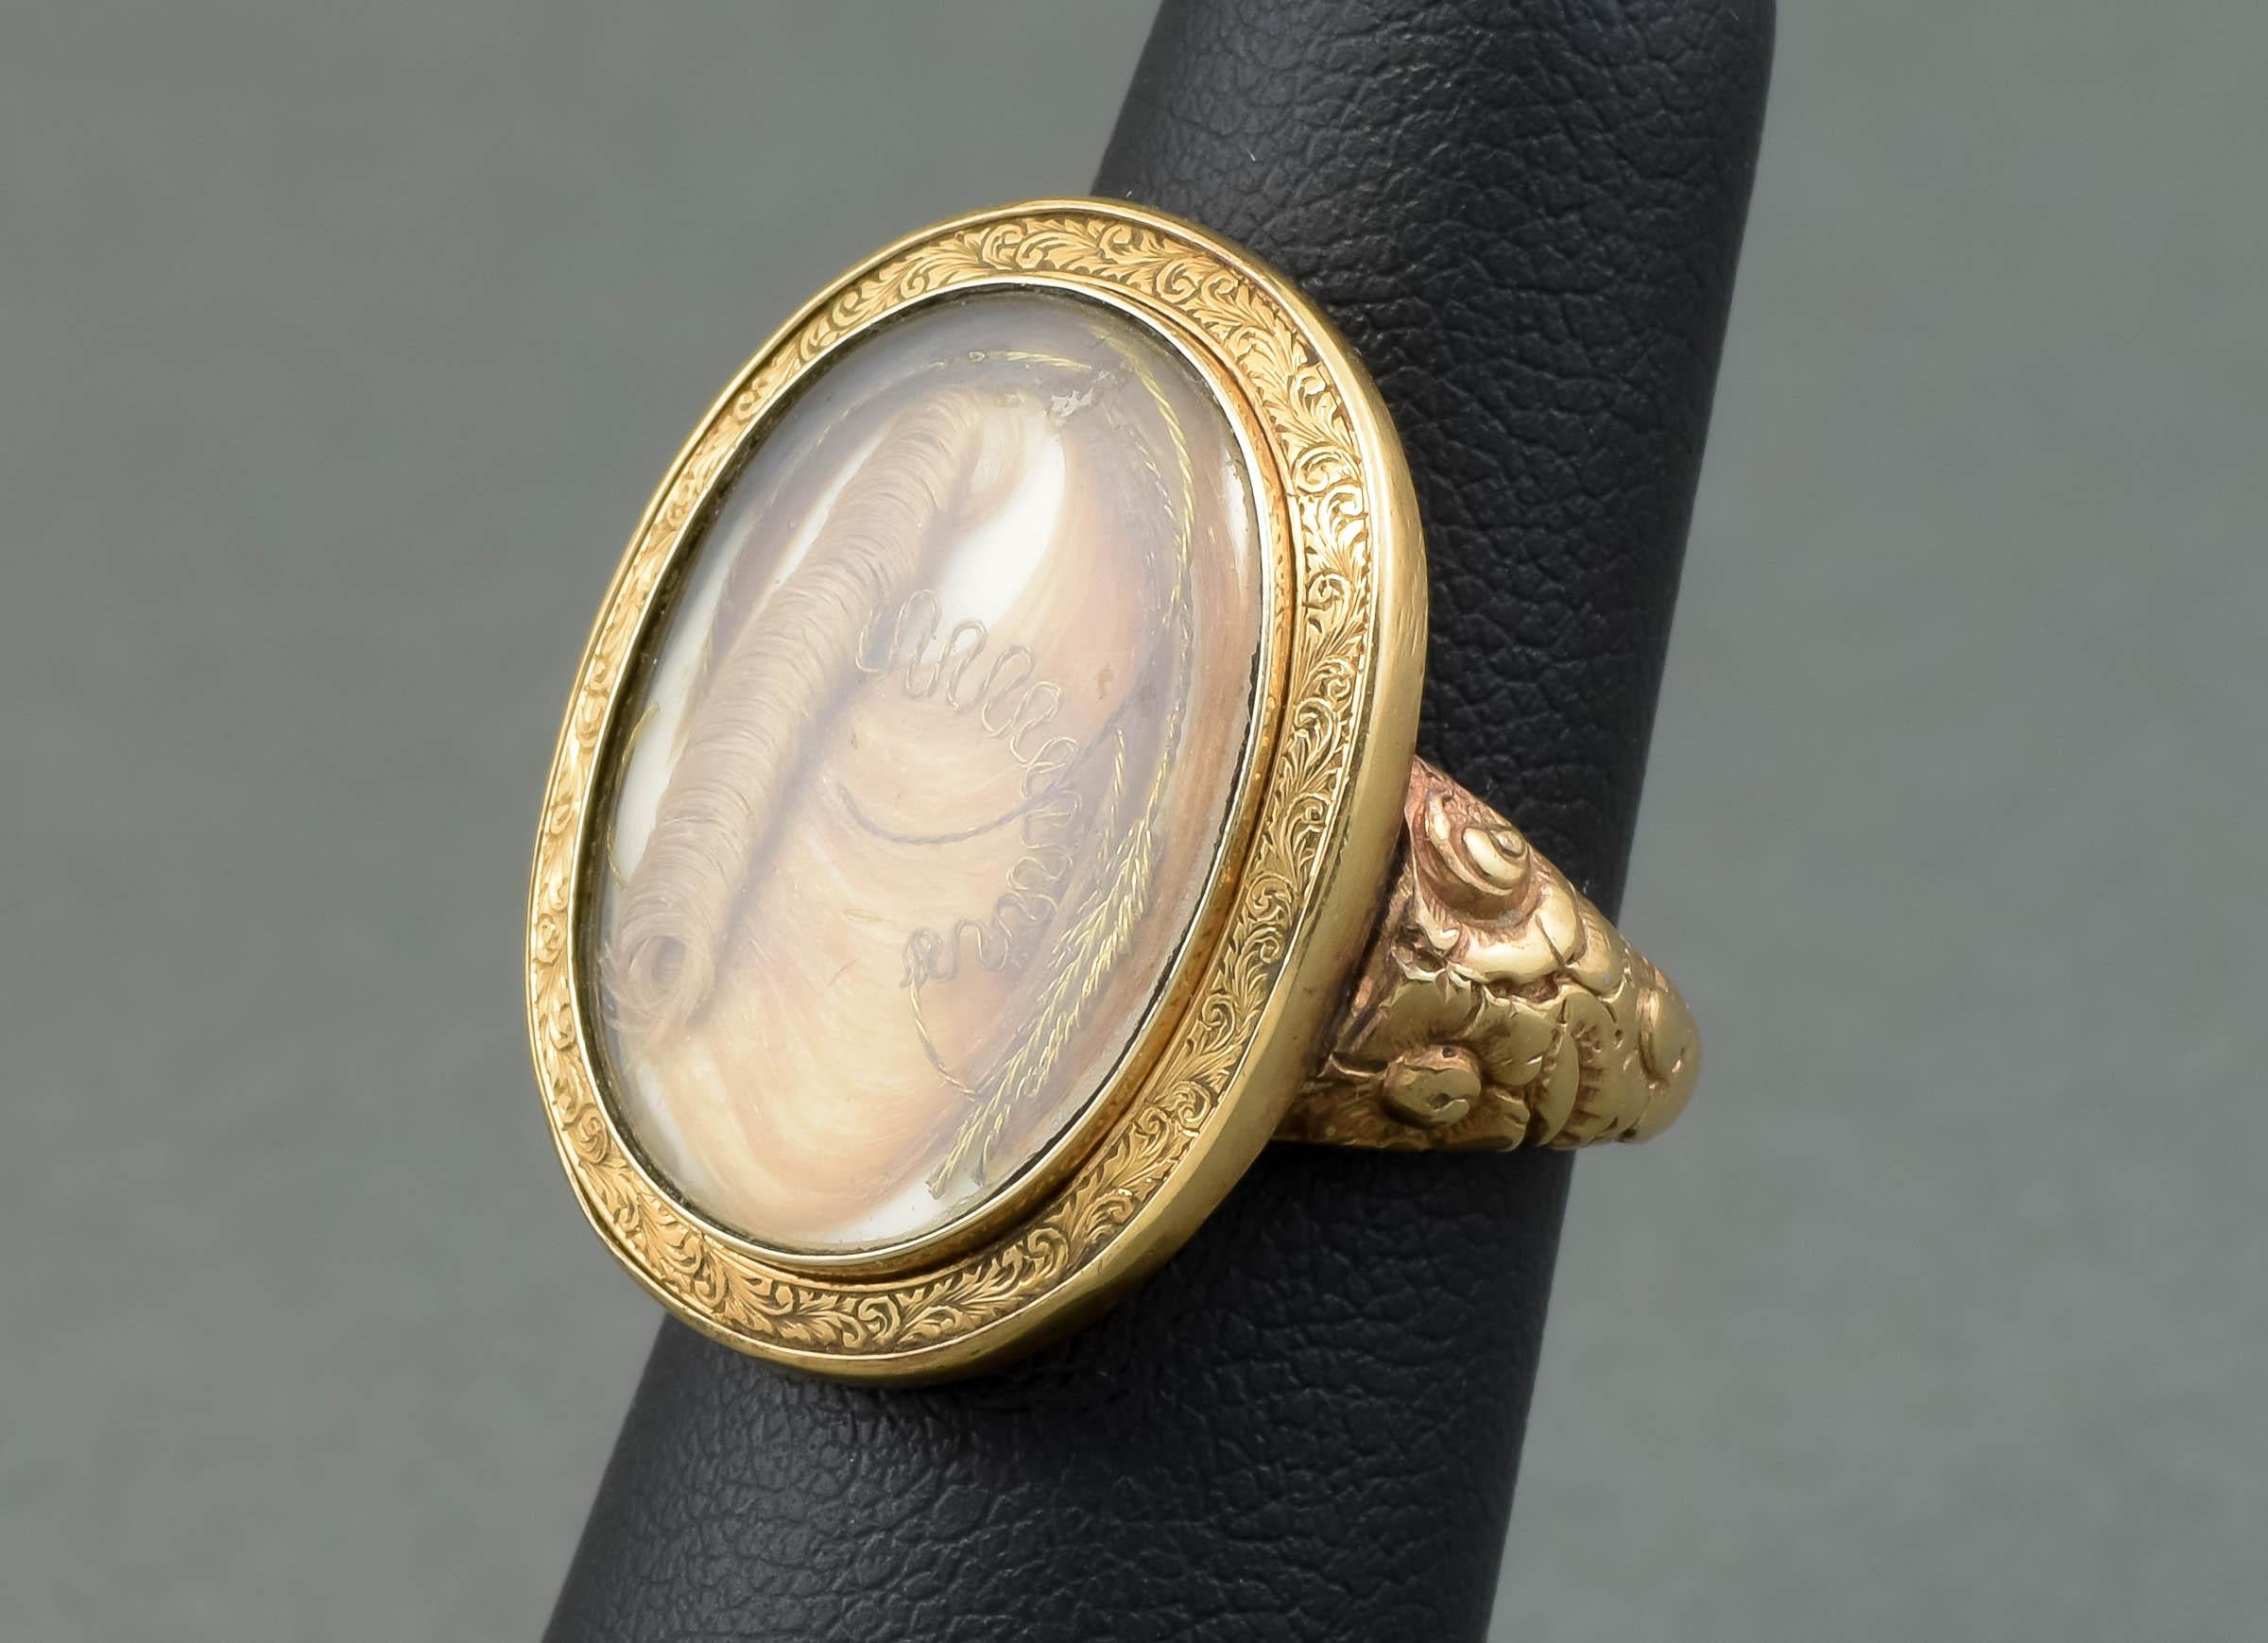 Antique Large Gold Locket Faced Ring with Hair Work, Engraved 1860 In Good Condition For Sale In Danvers, MA